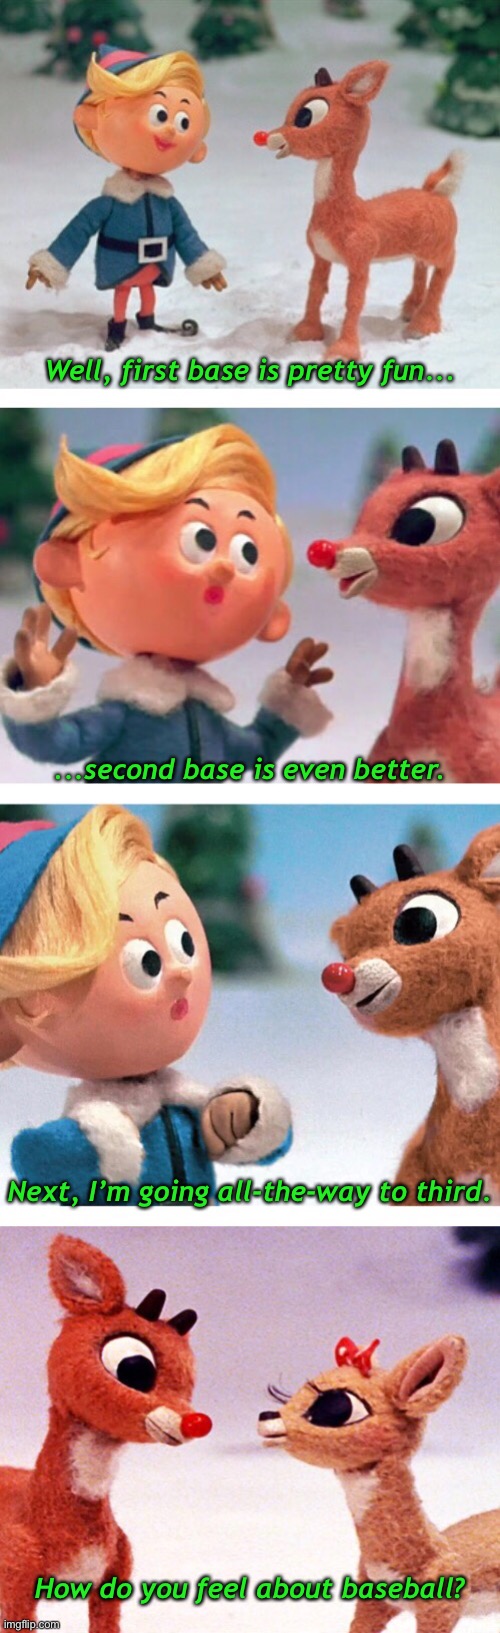 Hermey Talks to Rudolph About Girls | Well, first base is pretty fun... ...second base is even better. Next, I’m going all-the-way to third. How do you feel about baseball? | image tagged in funny memes,funny christmas,rudolph,relationships | made w/ Imgflip meme maker